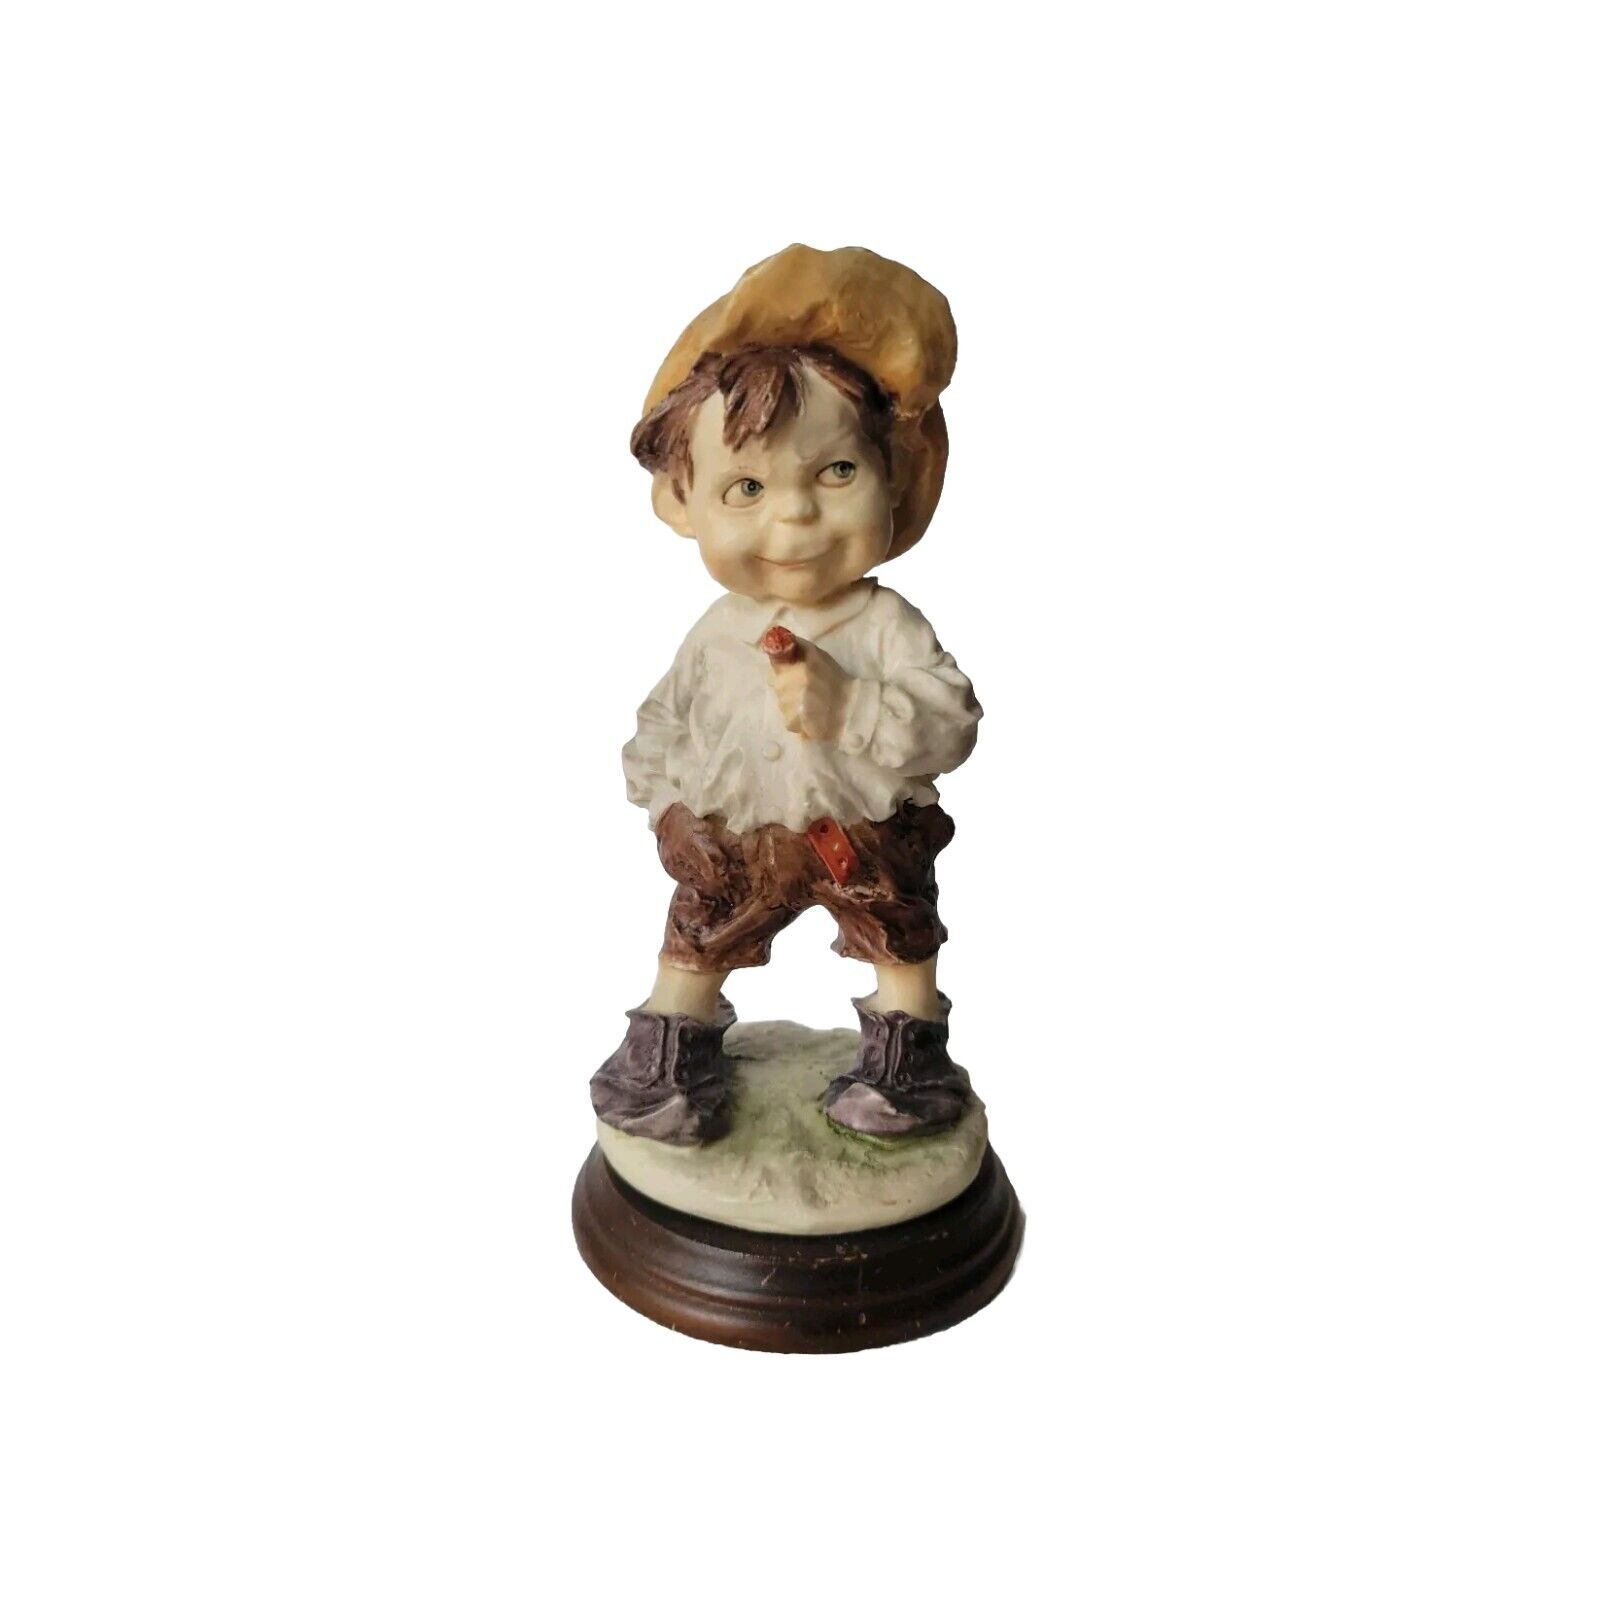 Vtg Collectible Resin on Wood NAUGHTY MISCHIEVOUS Boy Wearing Hat Holding Cigar